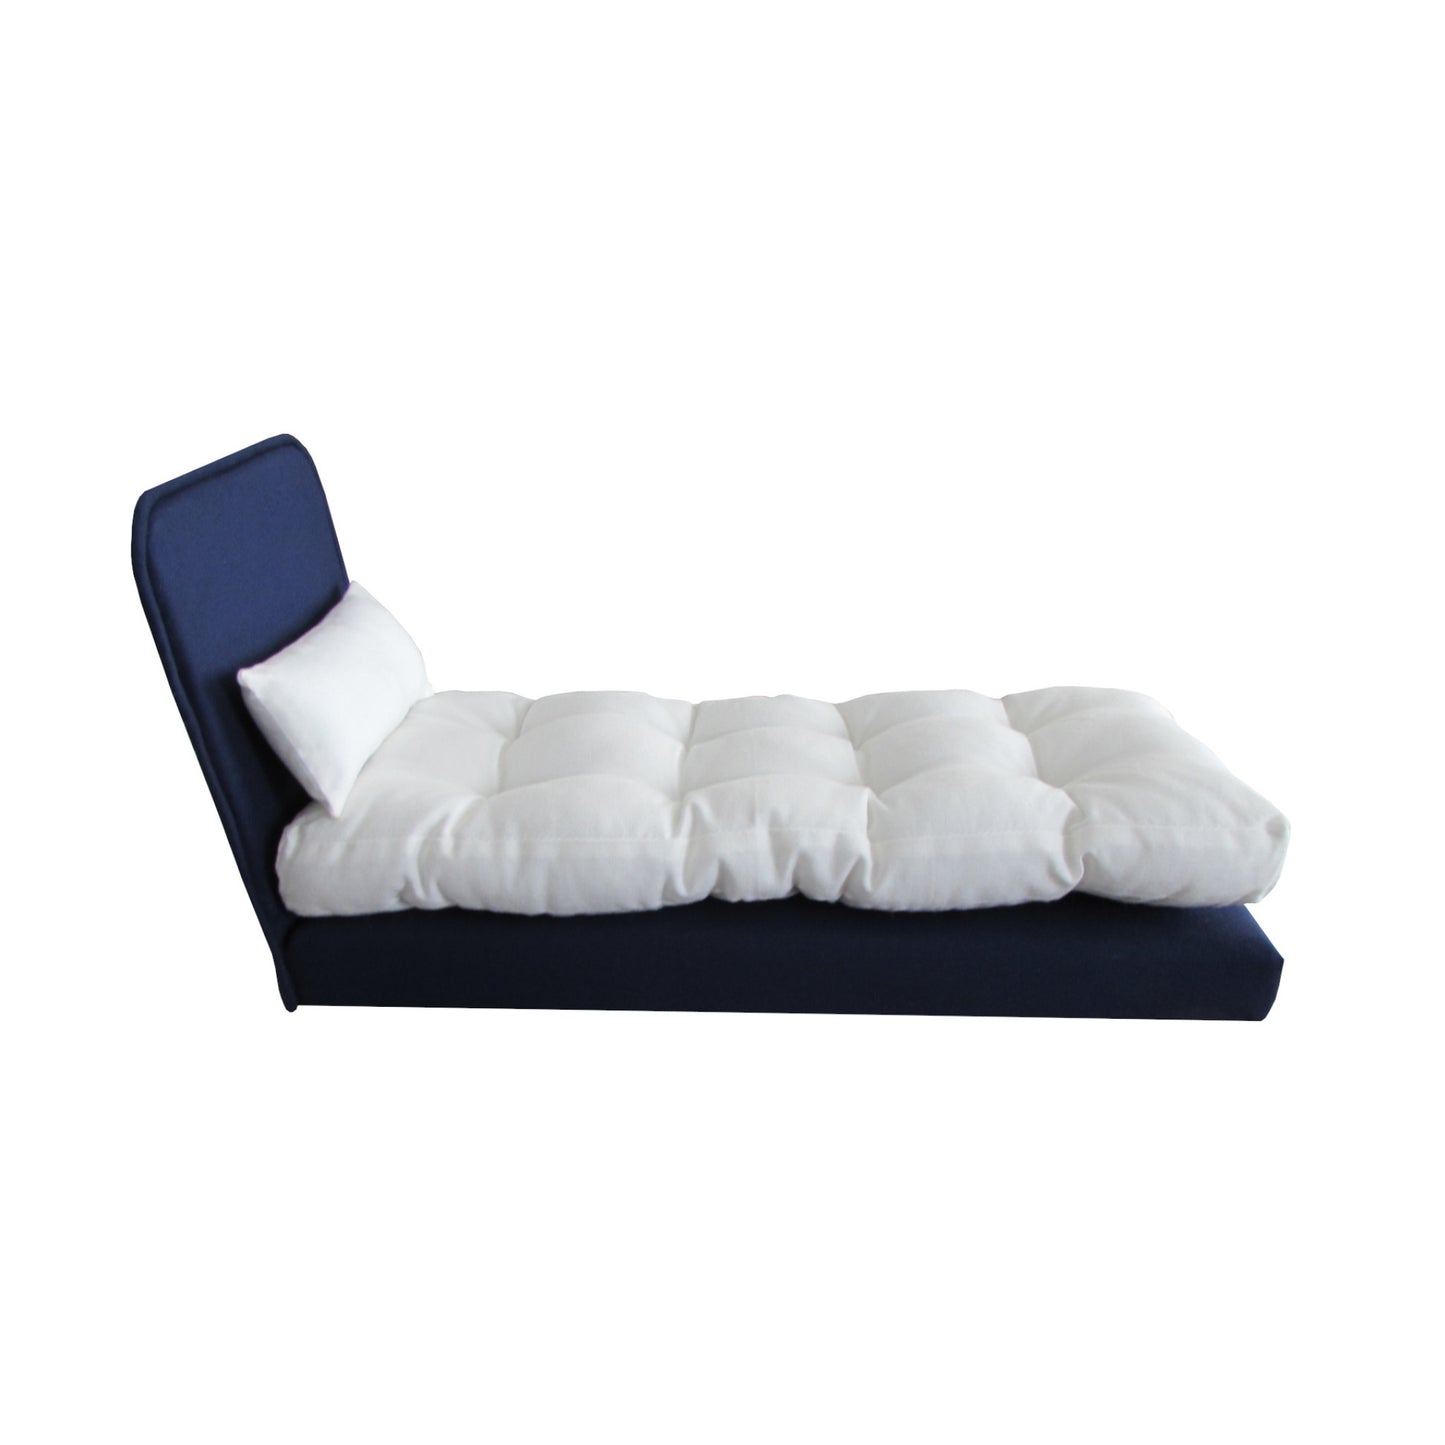 Upholstered Dark Blue Doll Bed for 11 1/2-inch and 12-inch dolls Side View